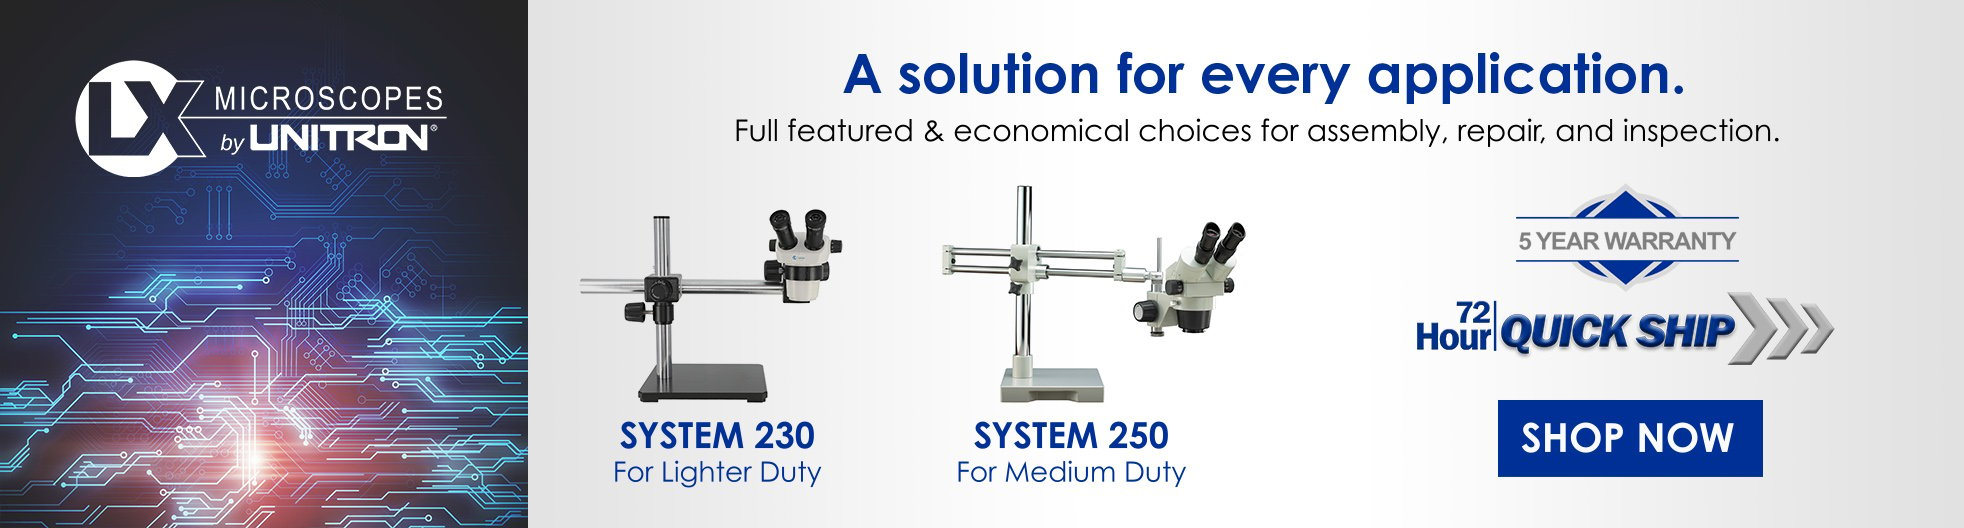 Quick Ship LX Microscopes by Unitron - Systems 230 and 250